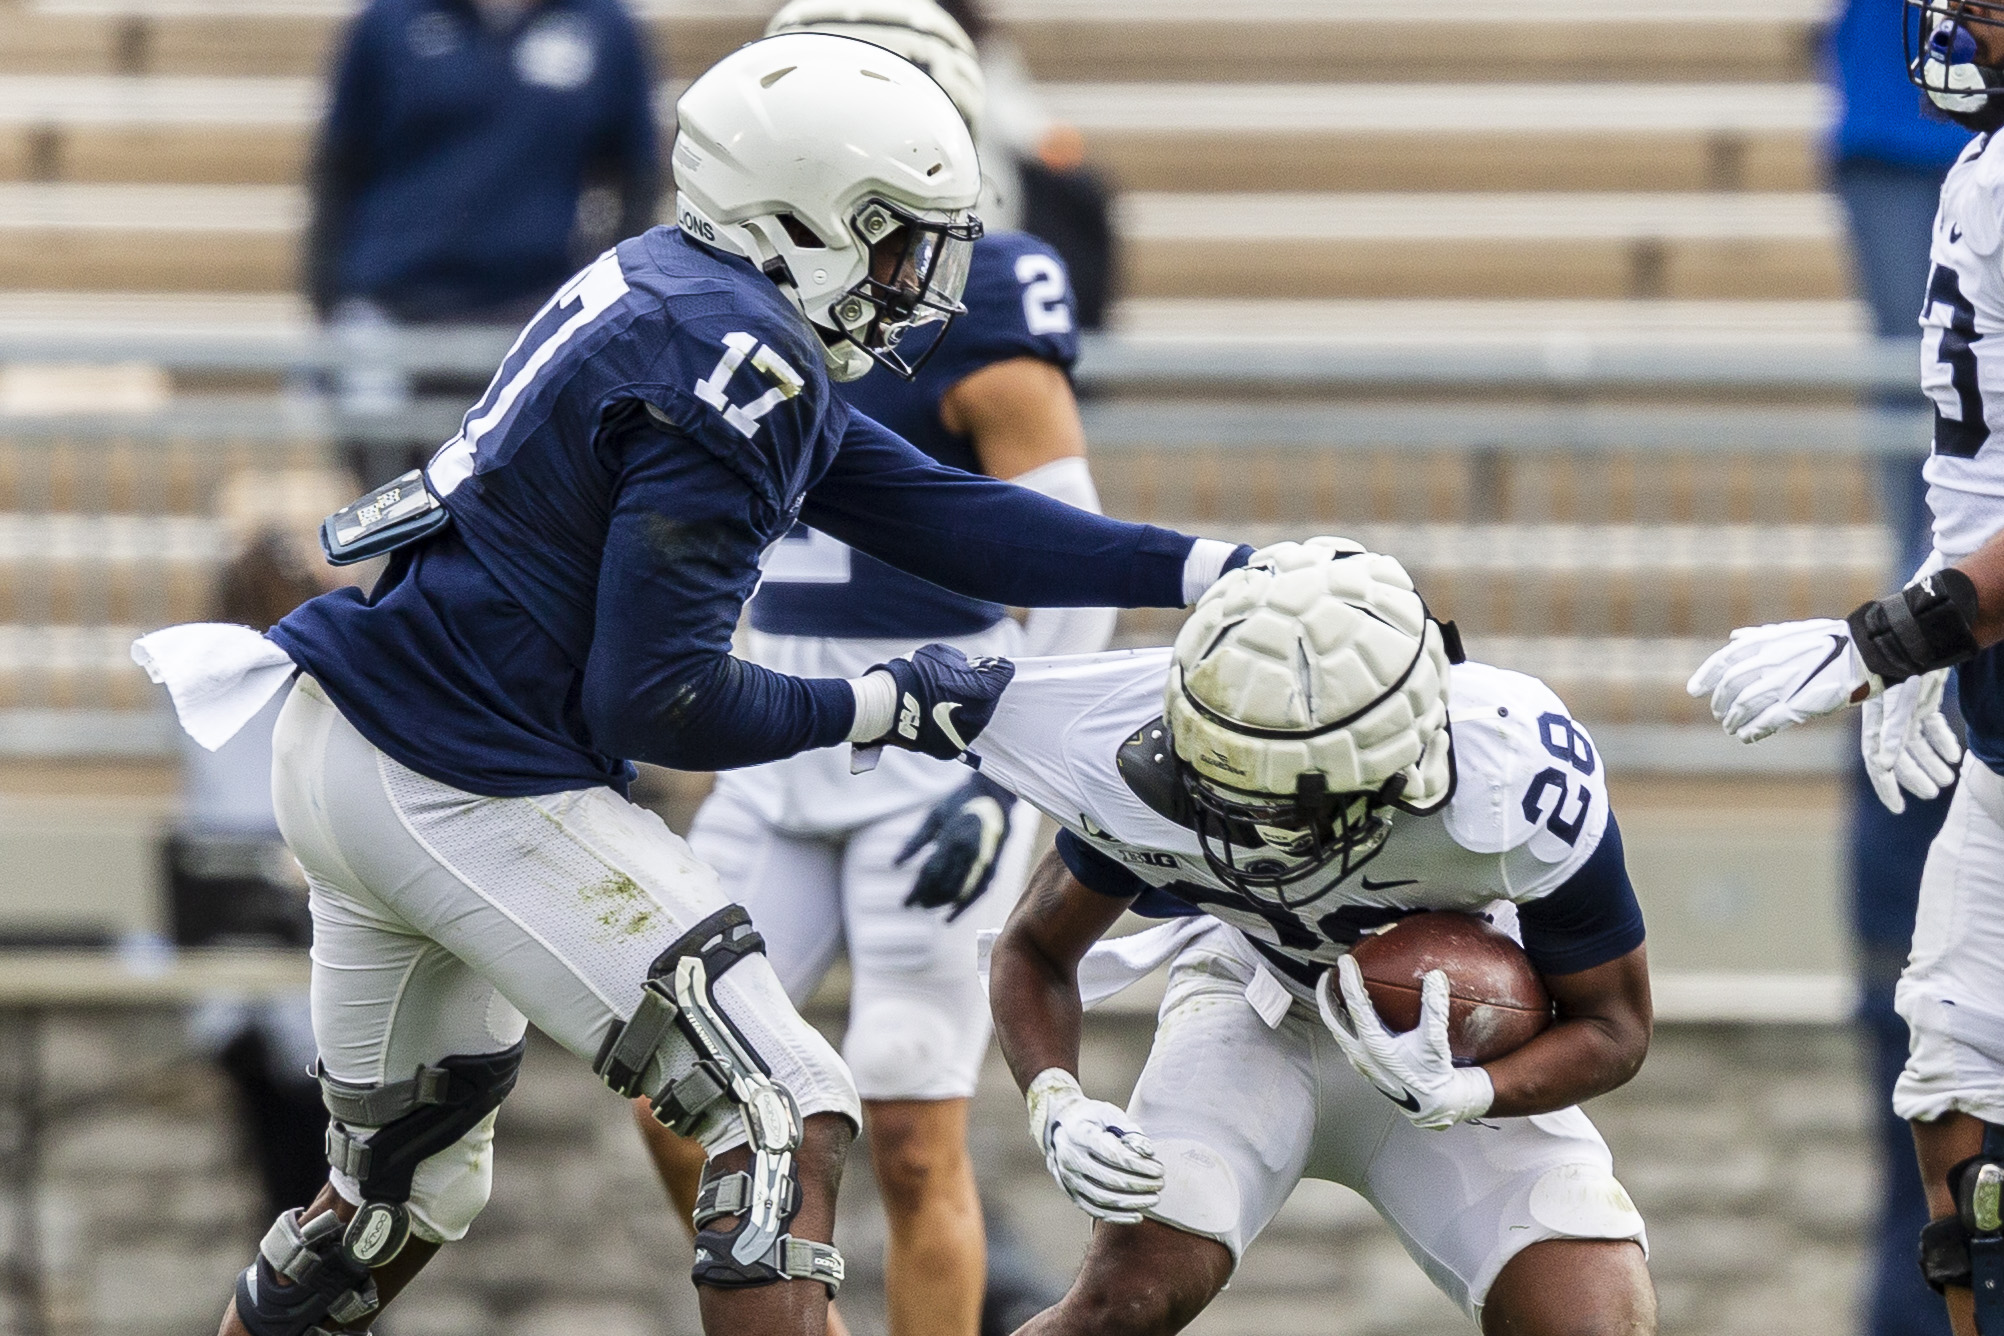 Jahan Dotson dazzles, Penn State defense faces issues: Ohio State